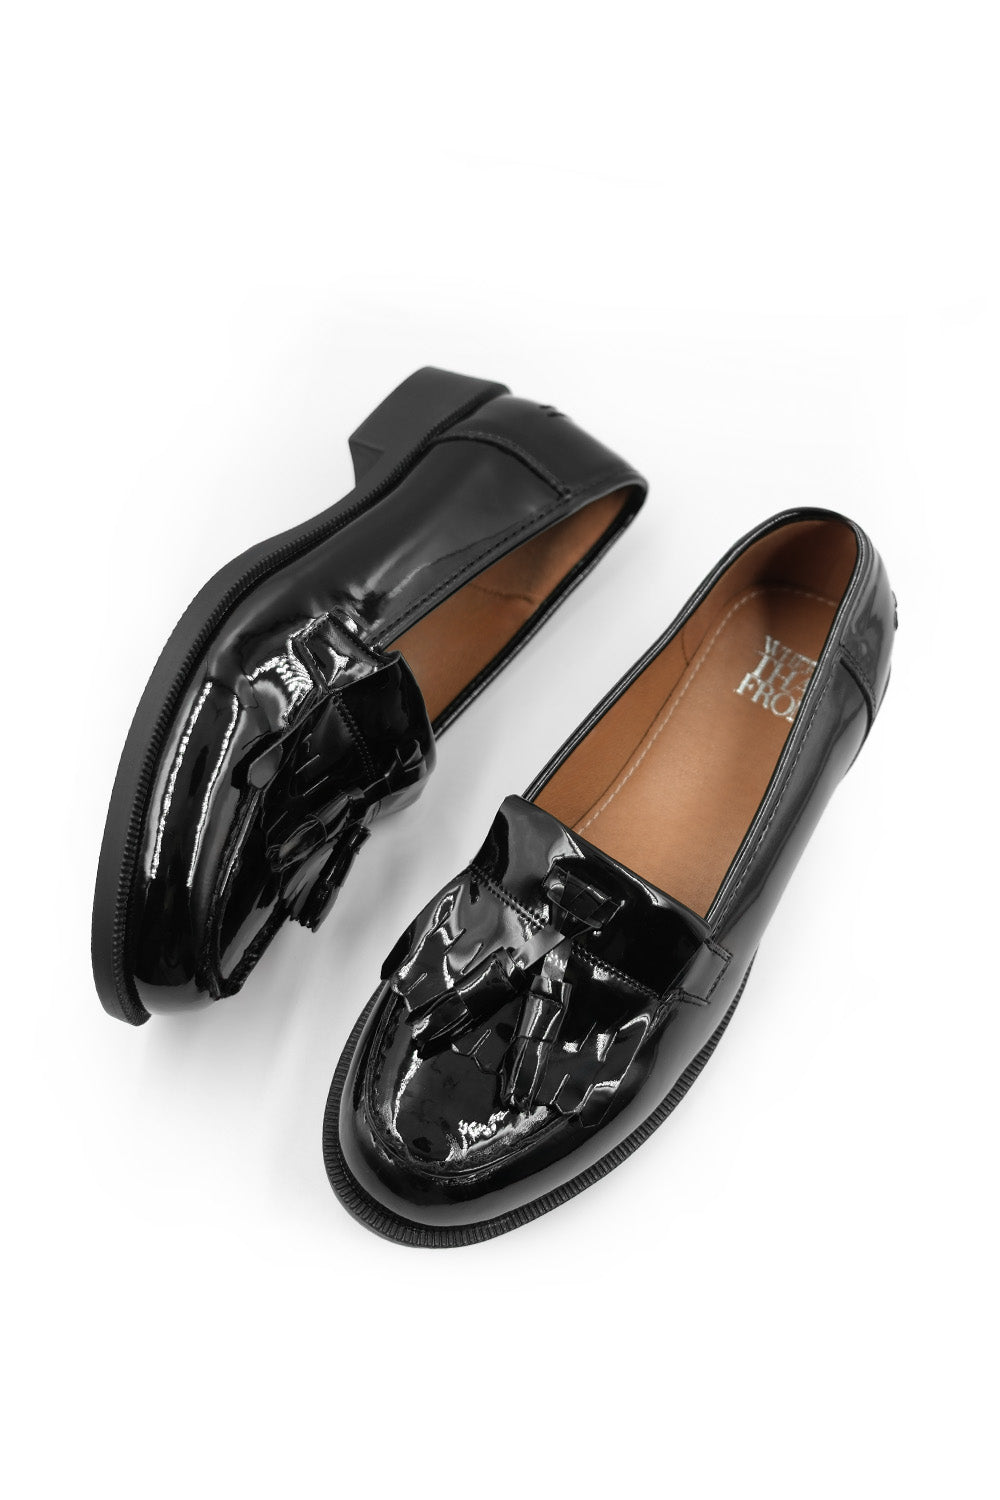 IMOGEN FLATFORM SLIP ON LOAFERS SHOES WITH TASSLE IN BLACK PATENT FAUX LEATHER